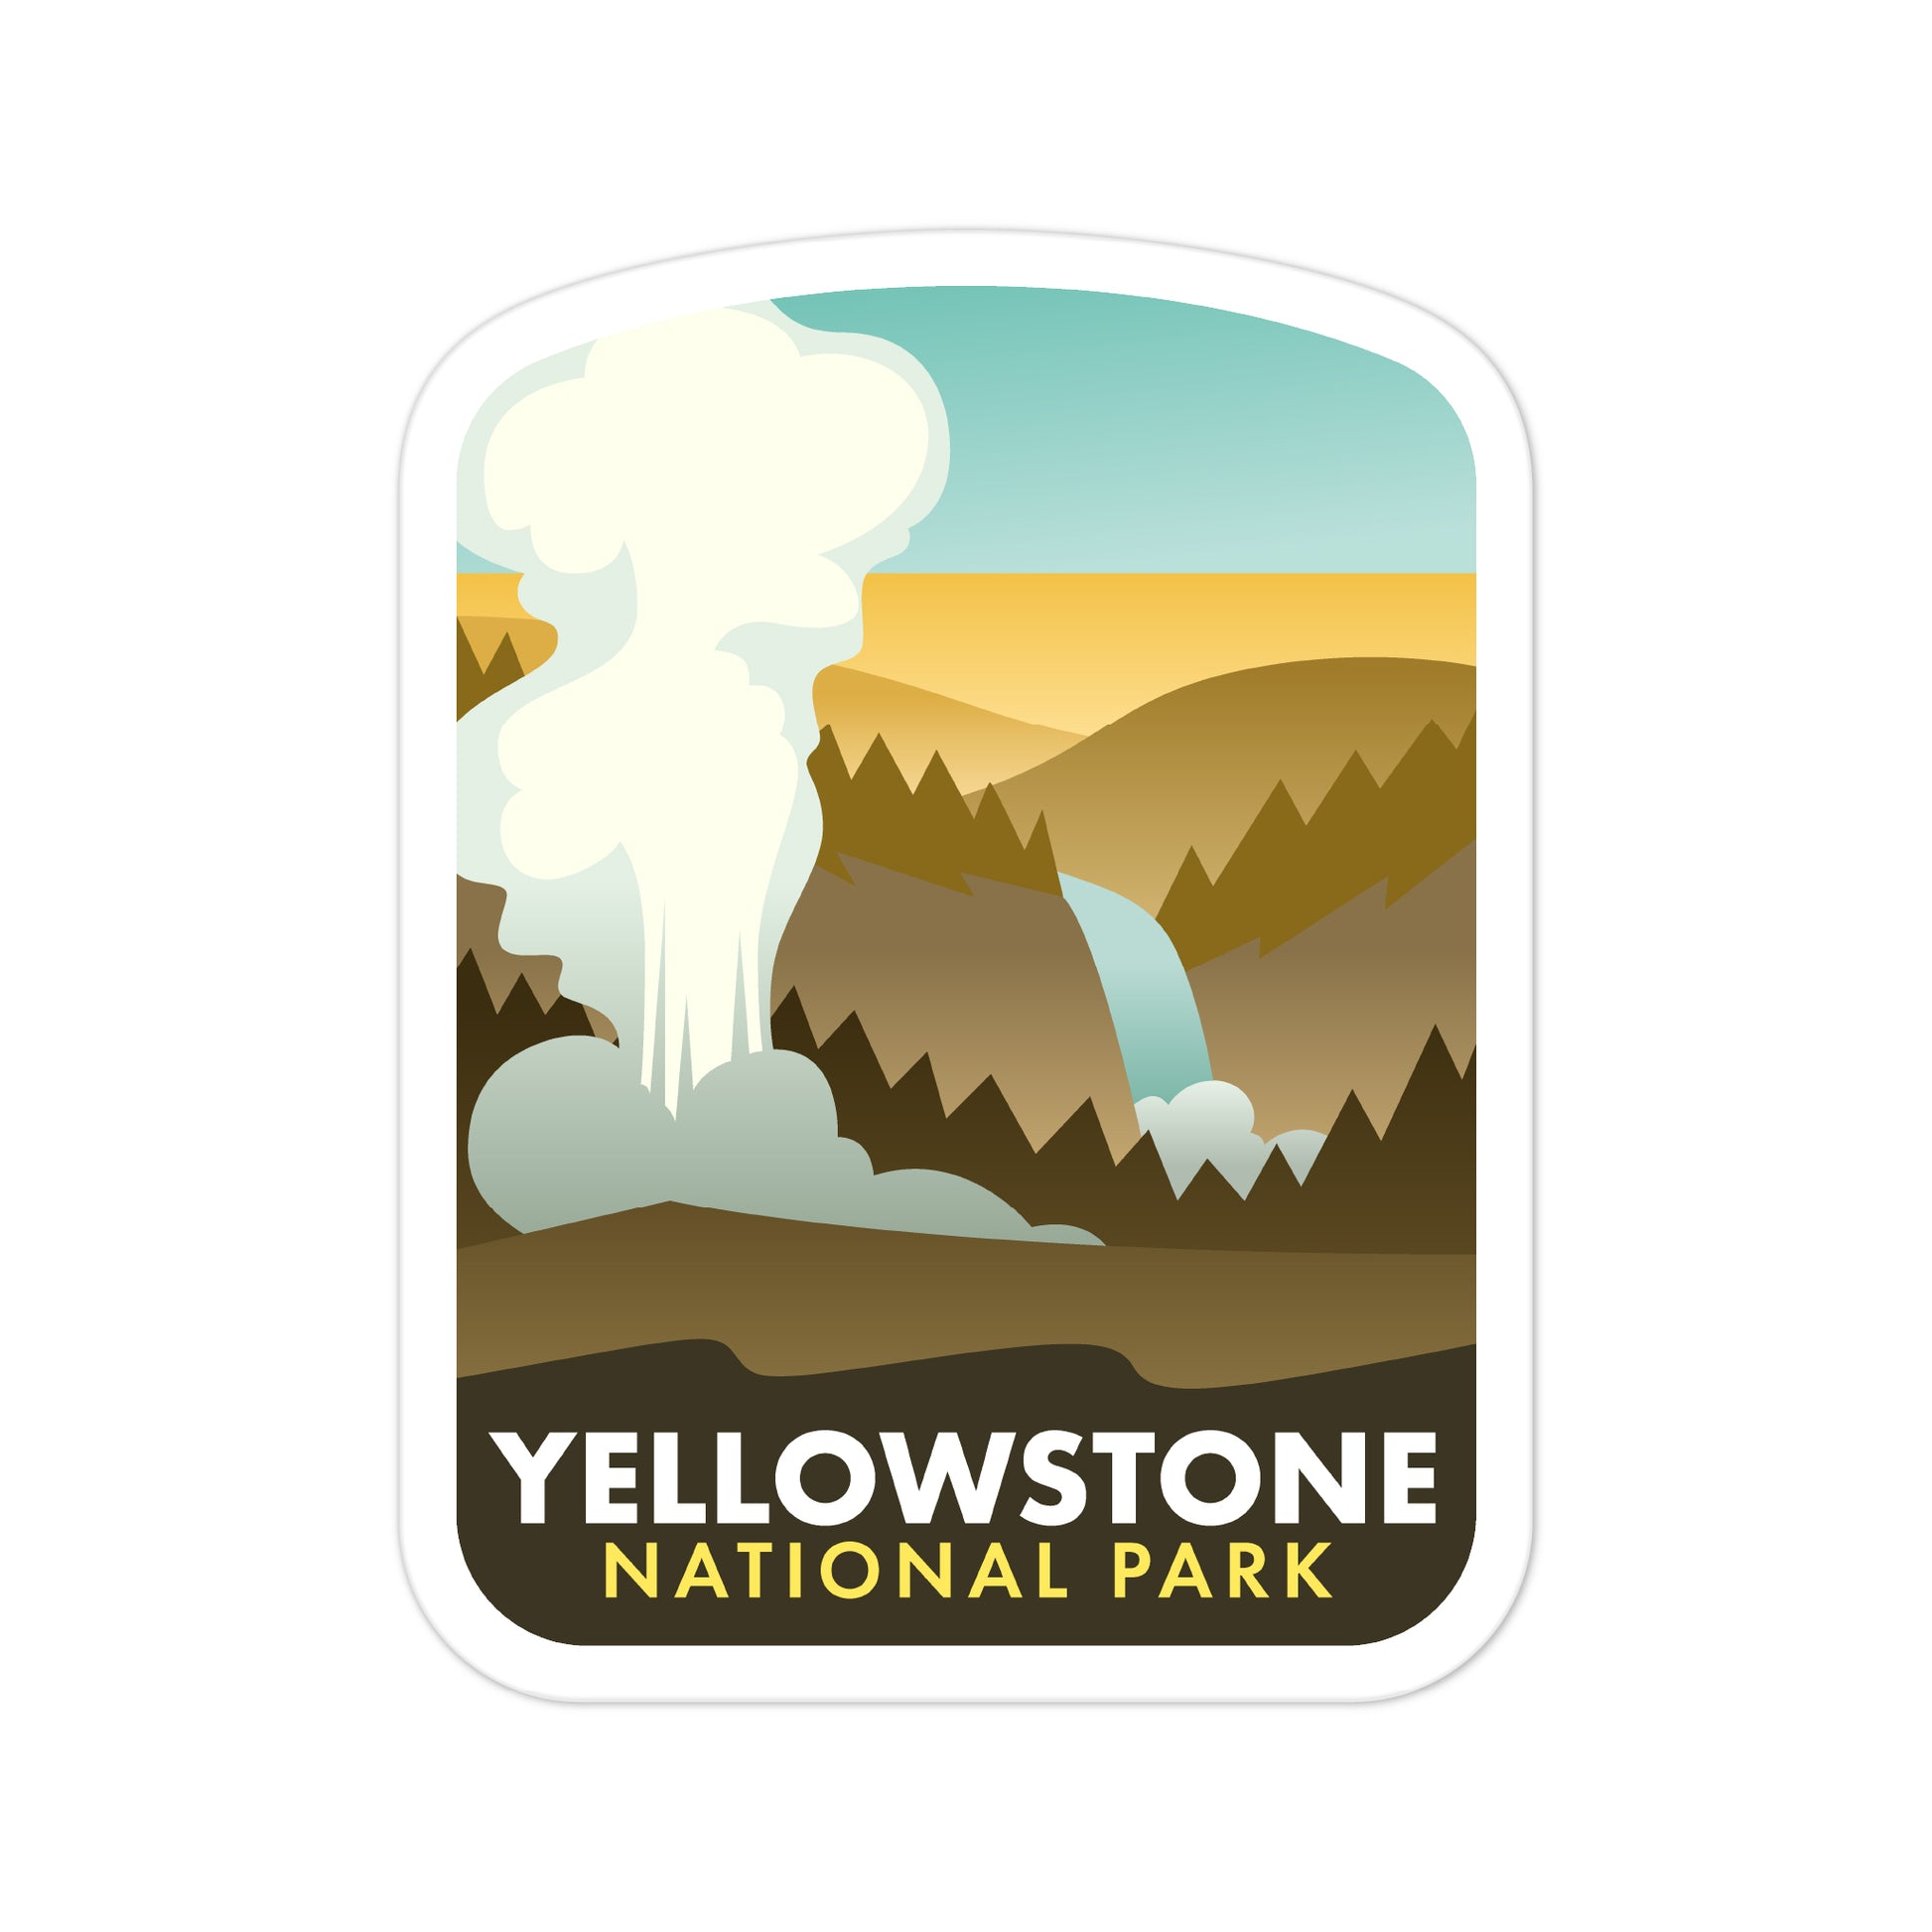 A sticker of Yellowstone National Park